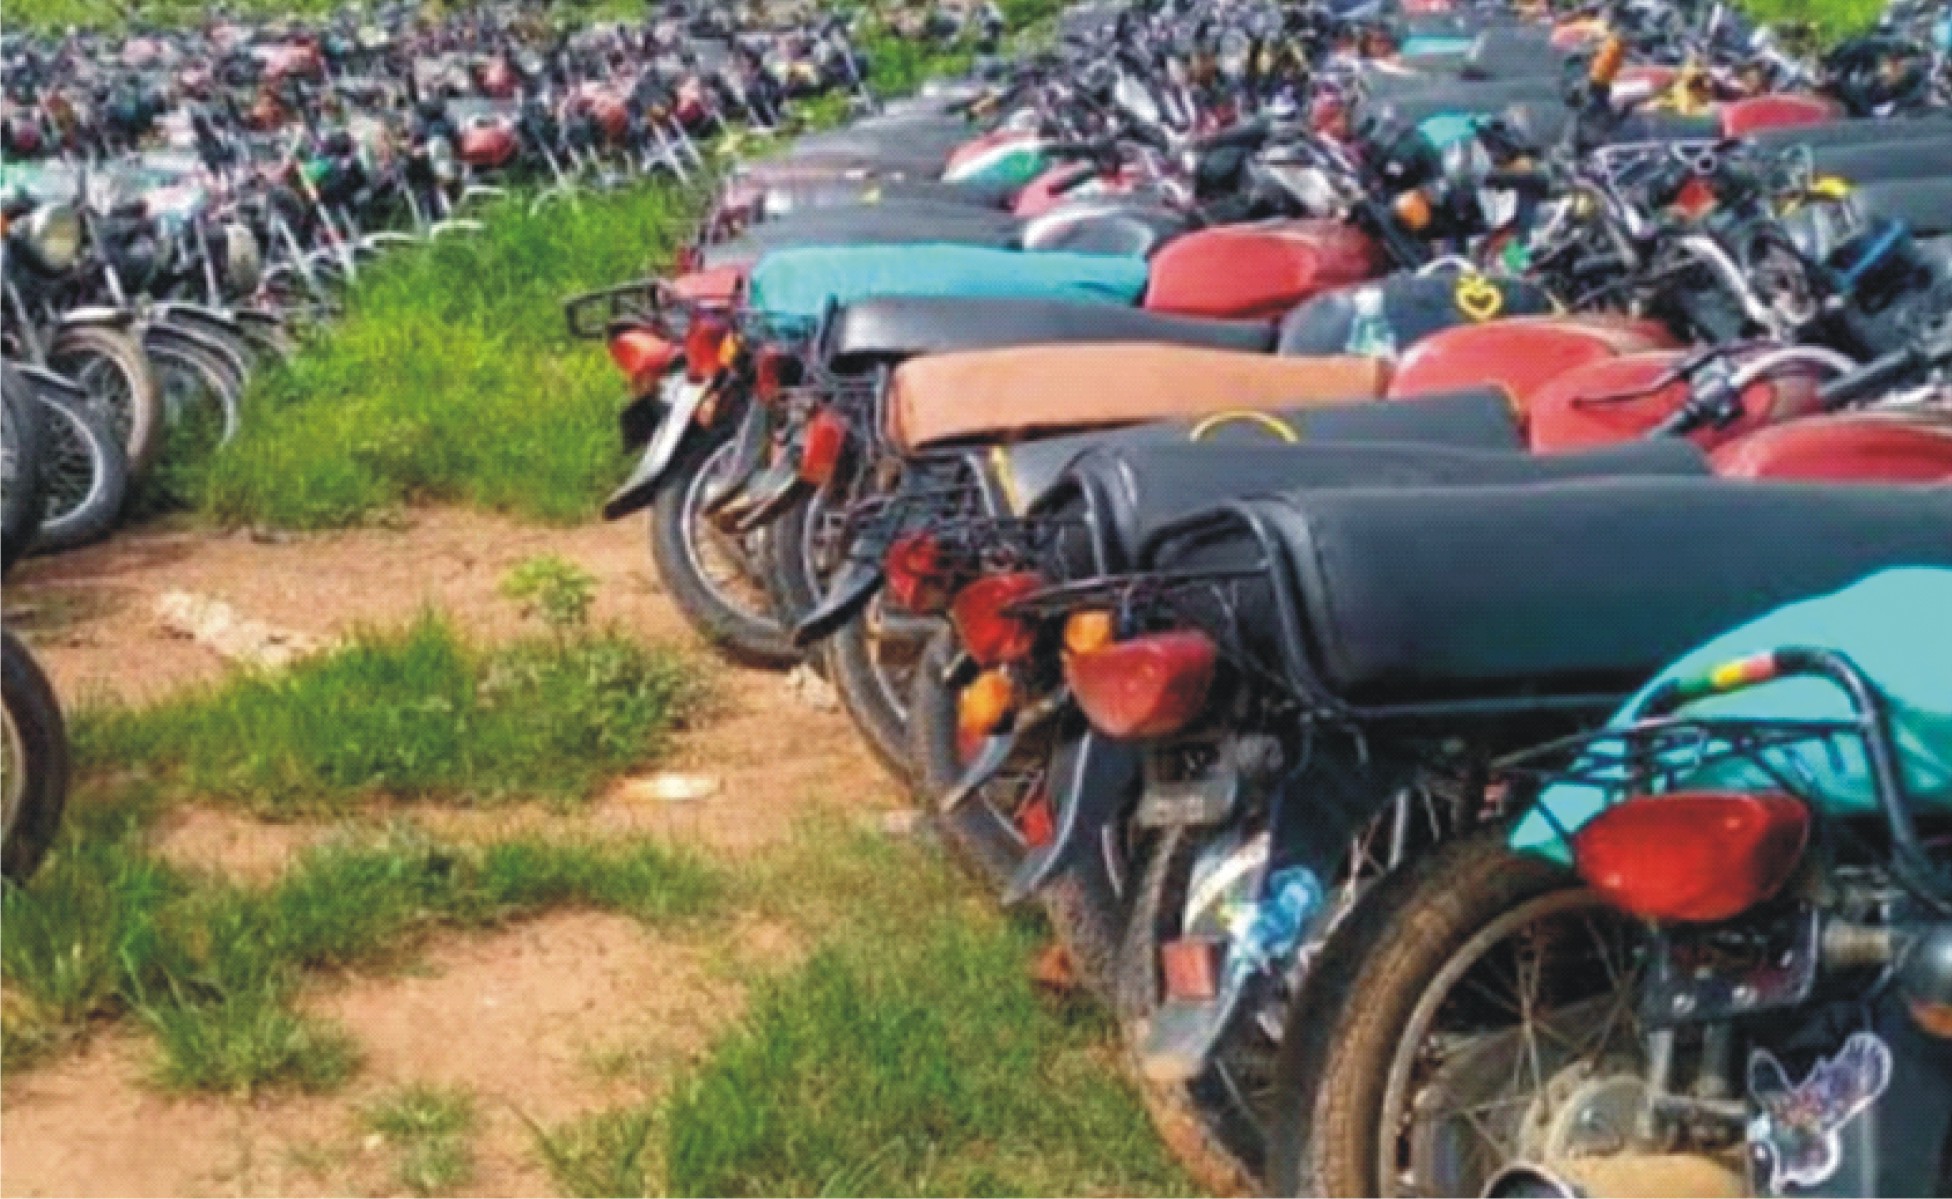 Some of the motorcycles impounded by the Amotekun Corps           		Photo:   Tola Gbadamosi